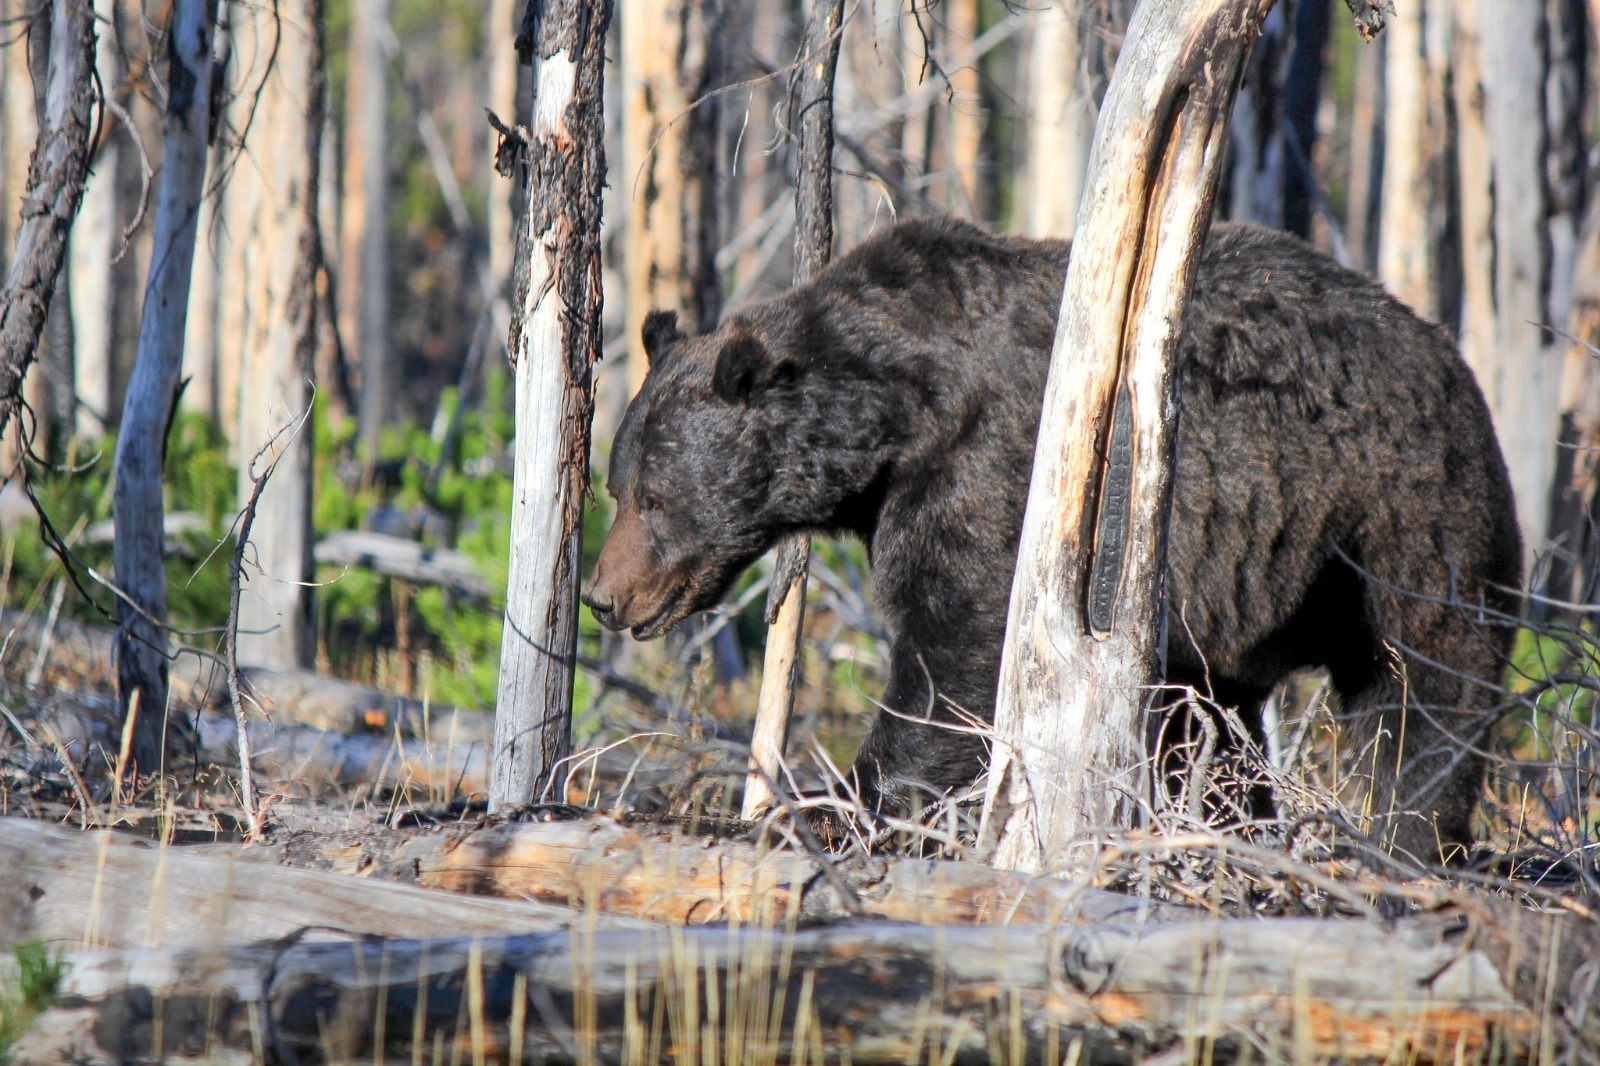 A grizzly in Yellowstone on the Howard Eaton Trail. Photo courtesy Eric Johnson/NPS